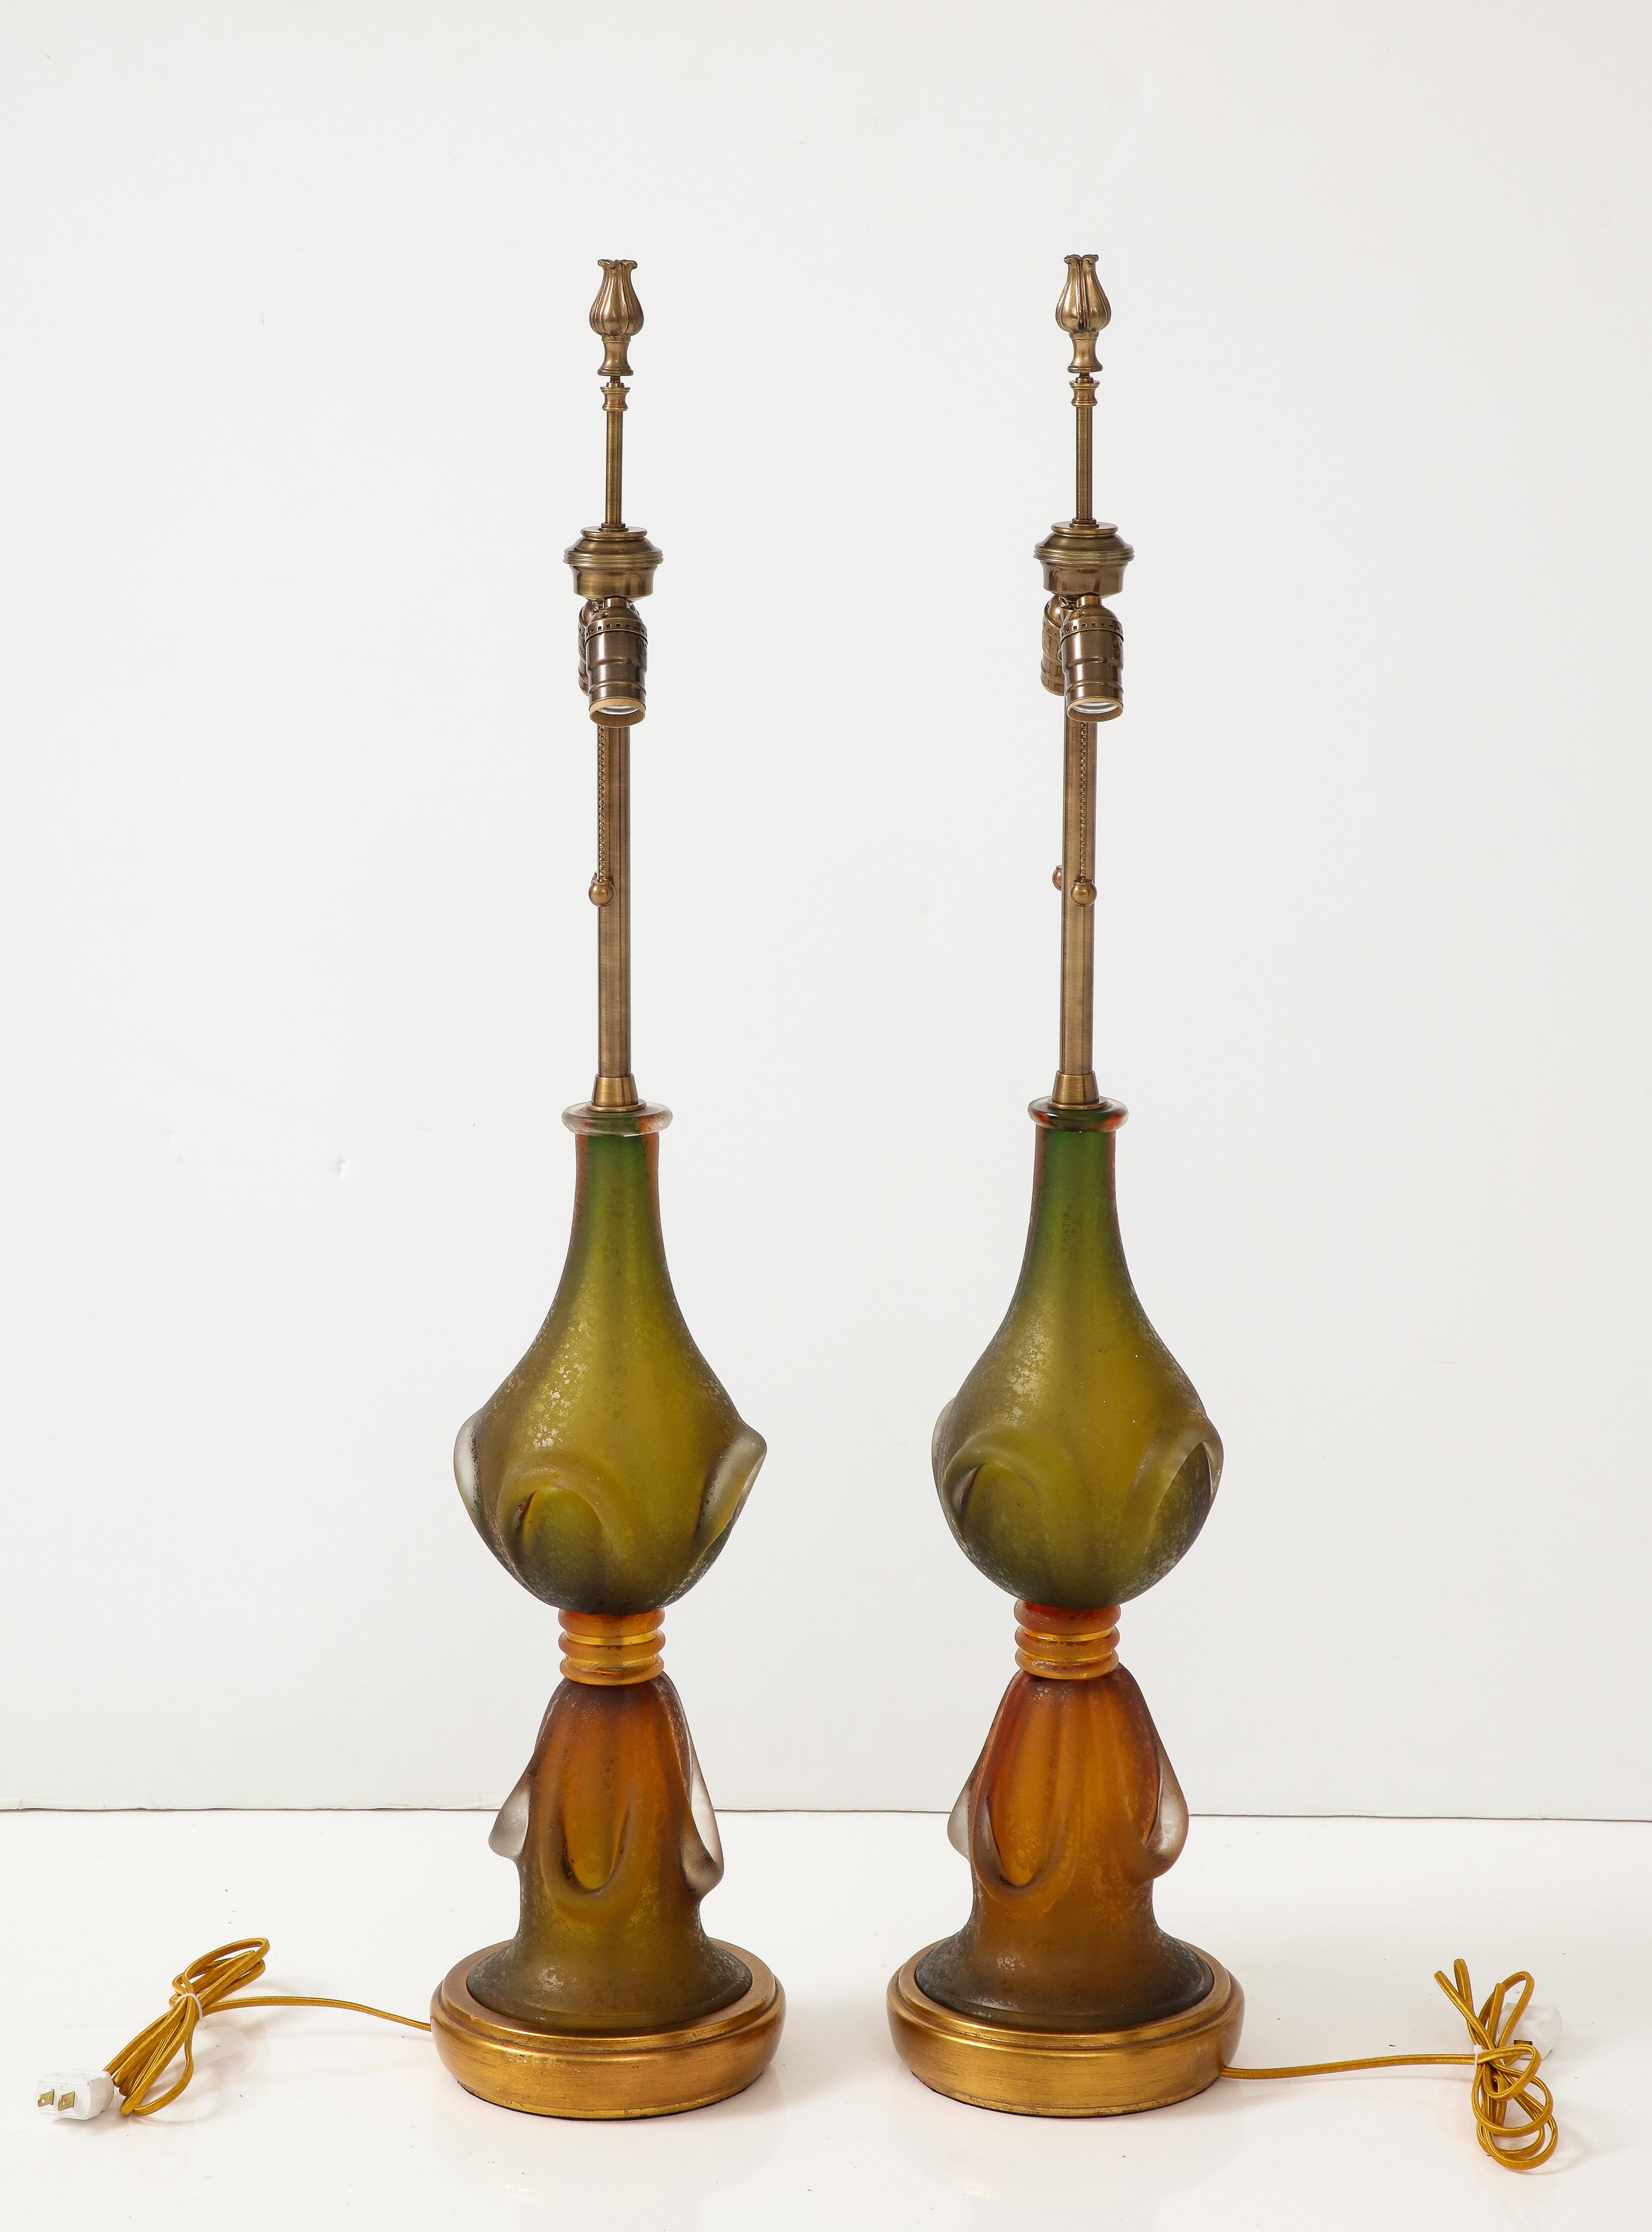 Pair of Mid Century Murano glass statement lamps by Seguso featuring a moss green/amber color and  corroso/matte finish. Lamps have been rewired for use in the USA. 75W max bulbs.